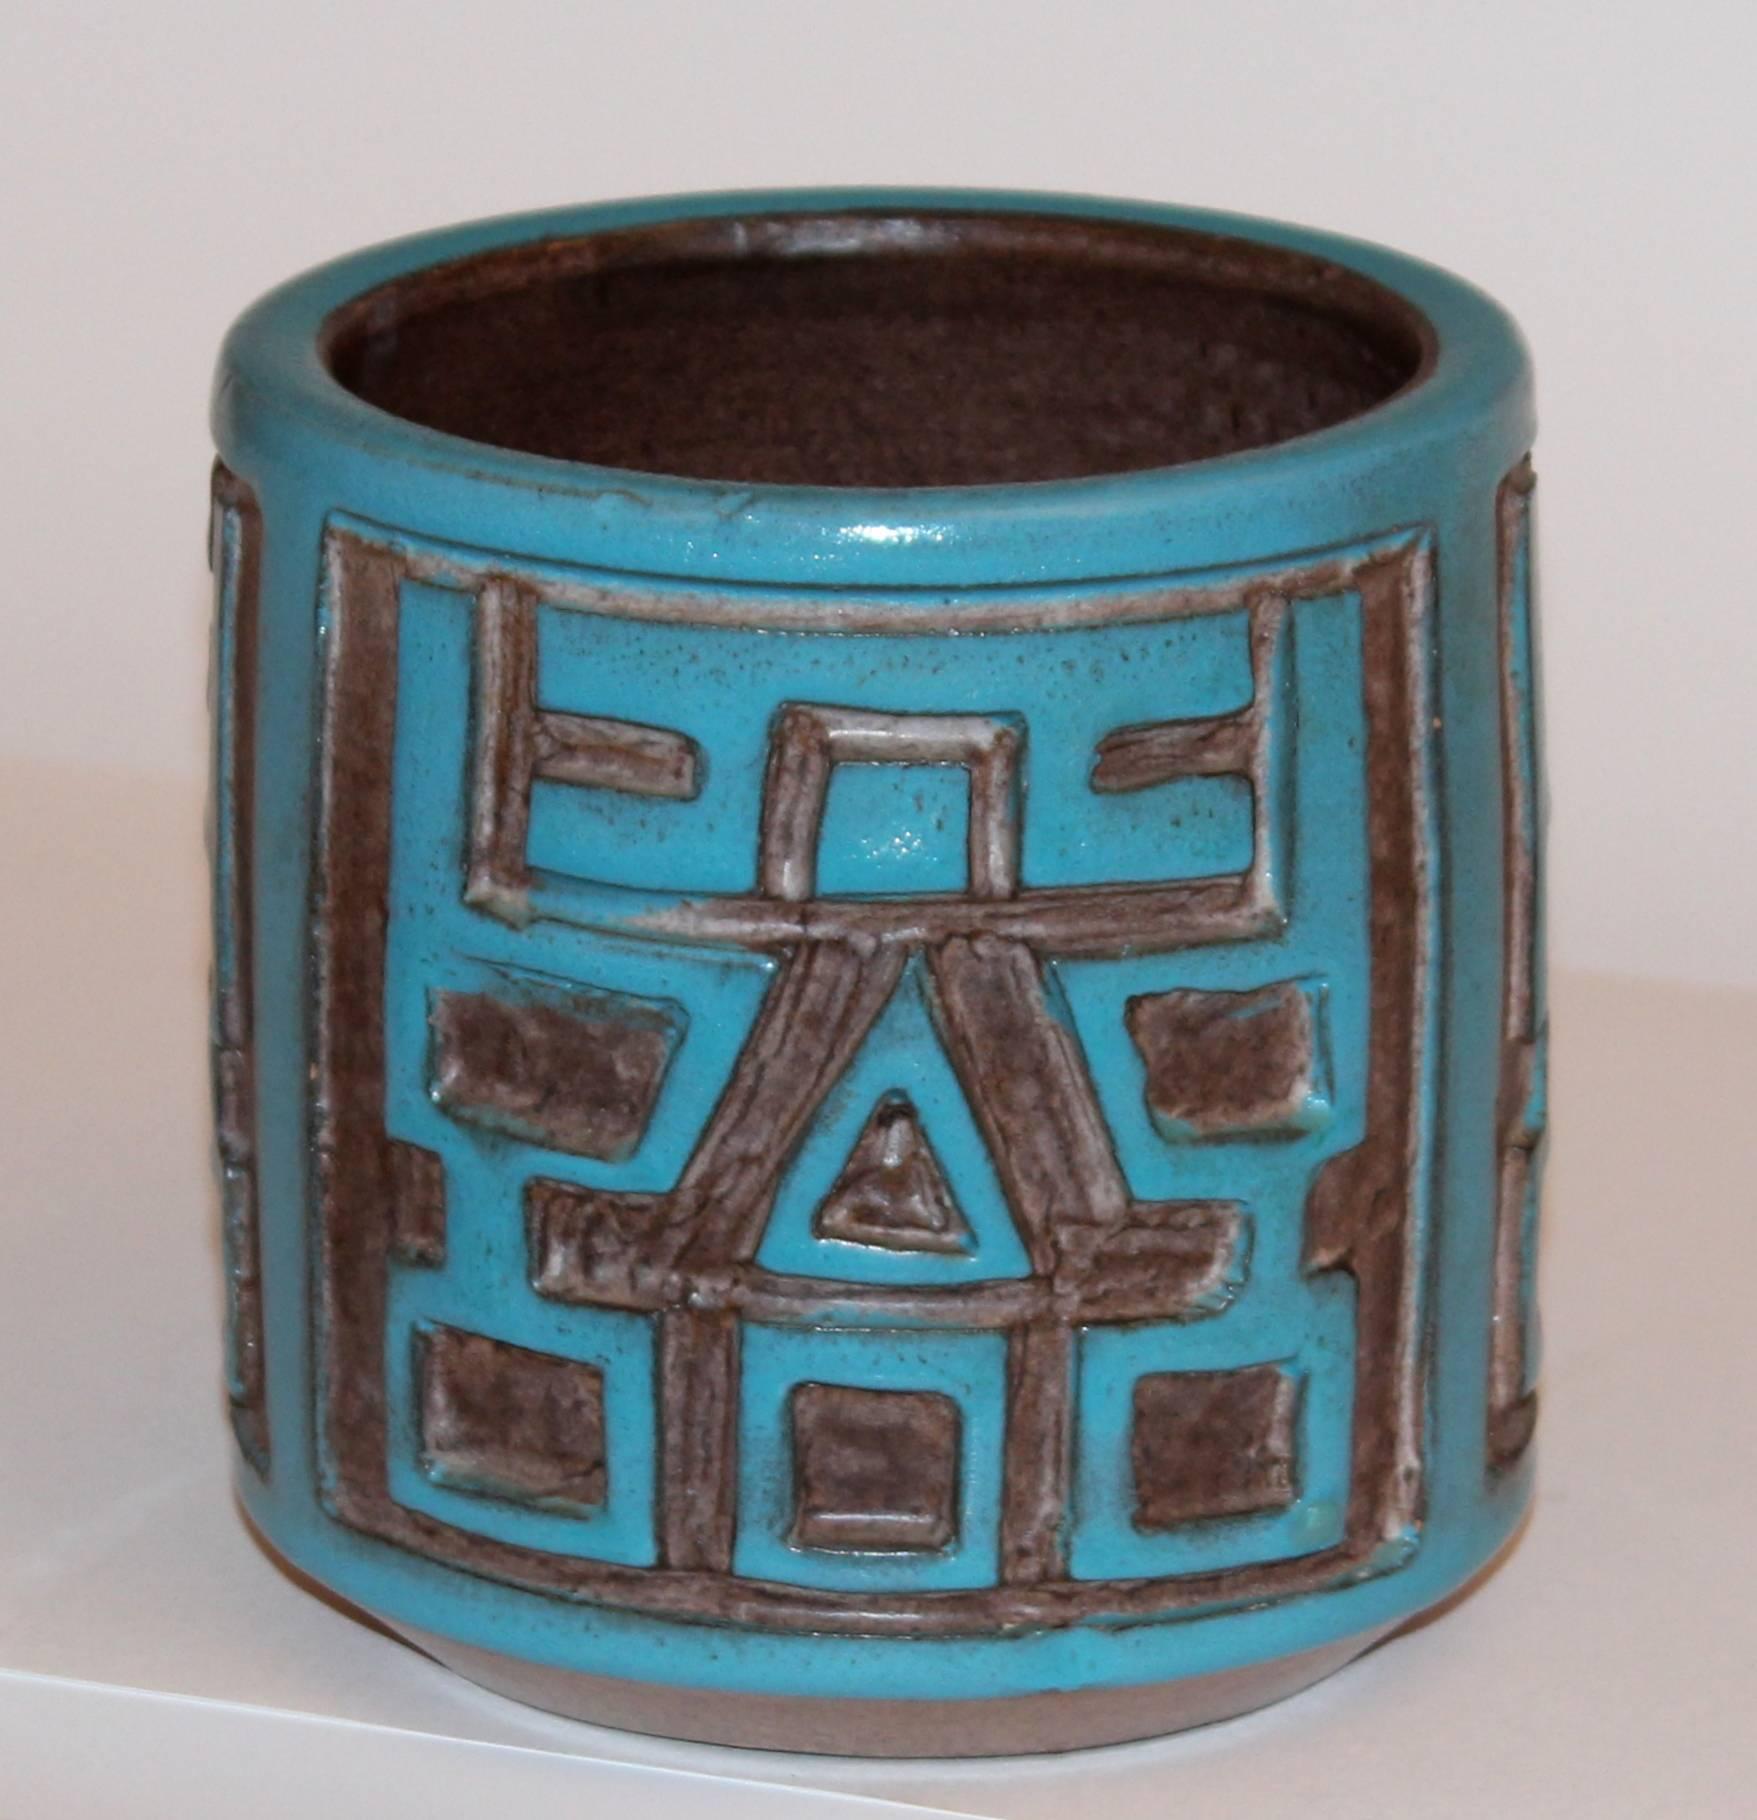 Vintage Bitossi Italian art pottery brush pot or vase with deeply carved Aztec style abstract design, circa 1960s. Measures: 5 1/8